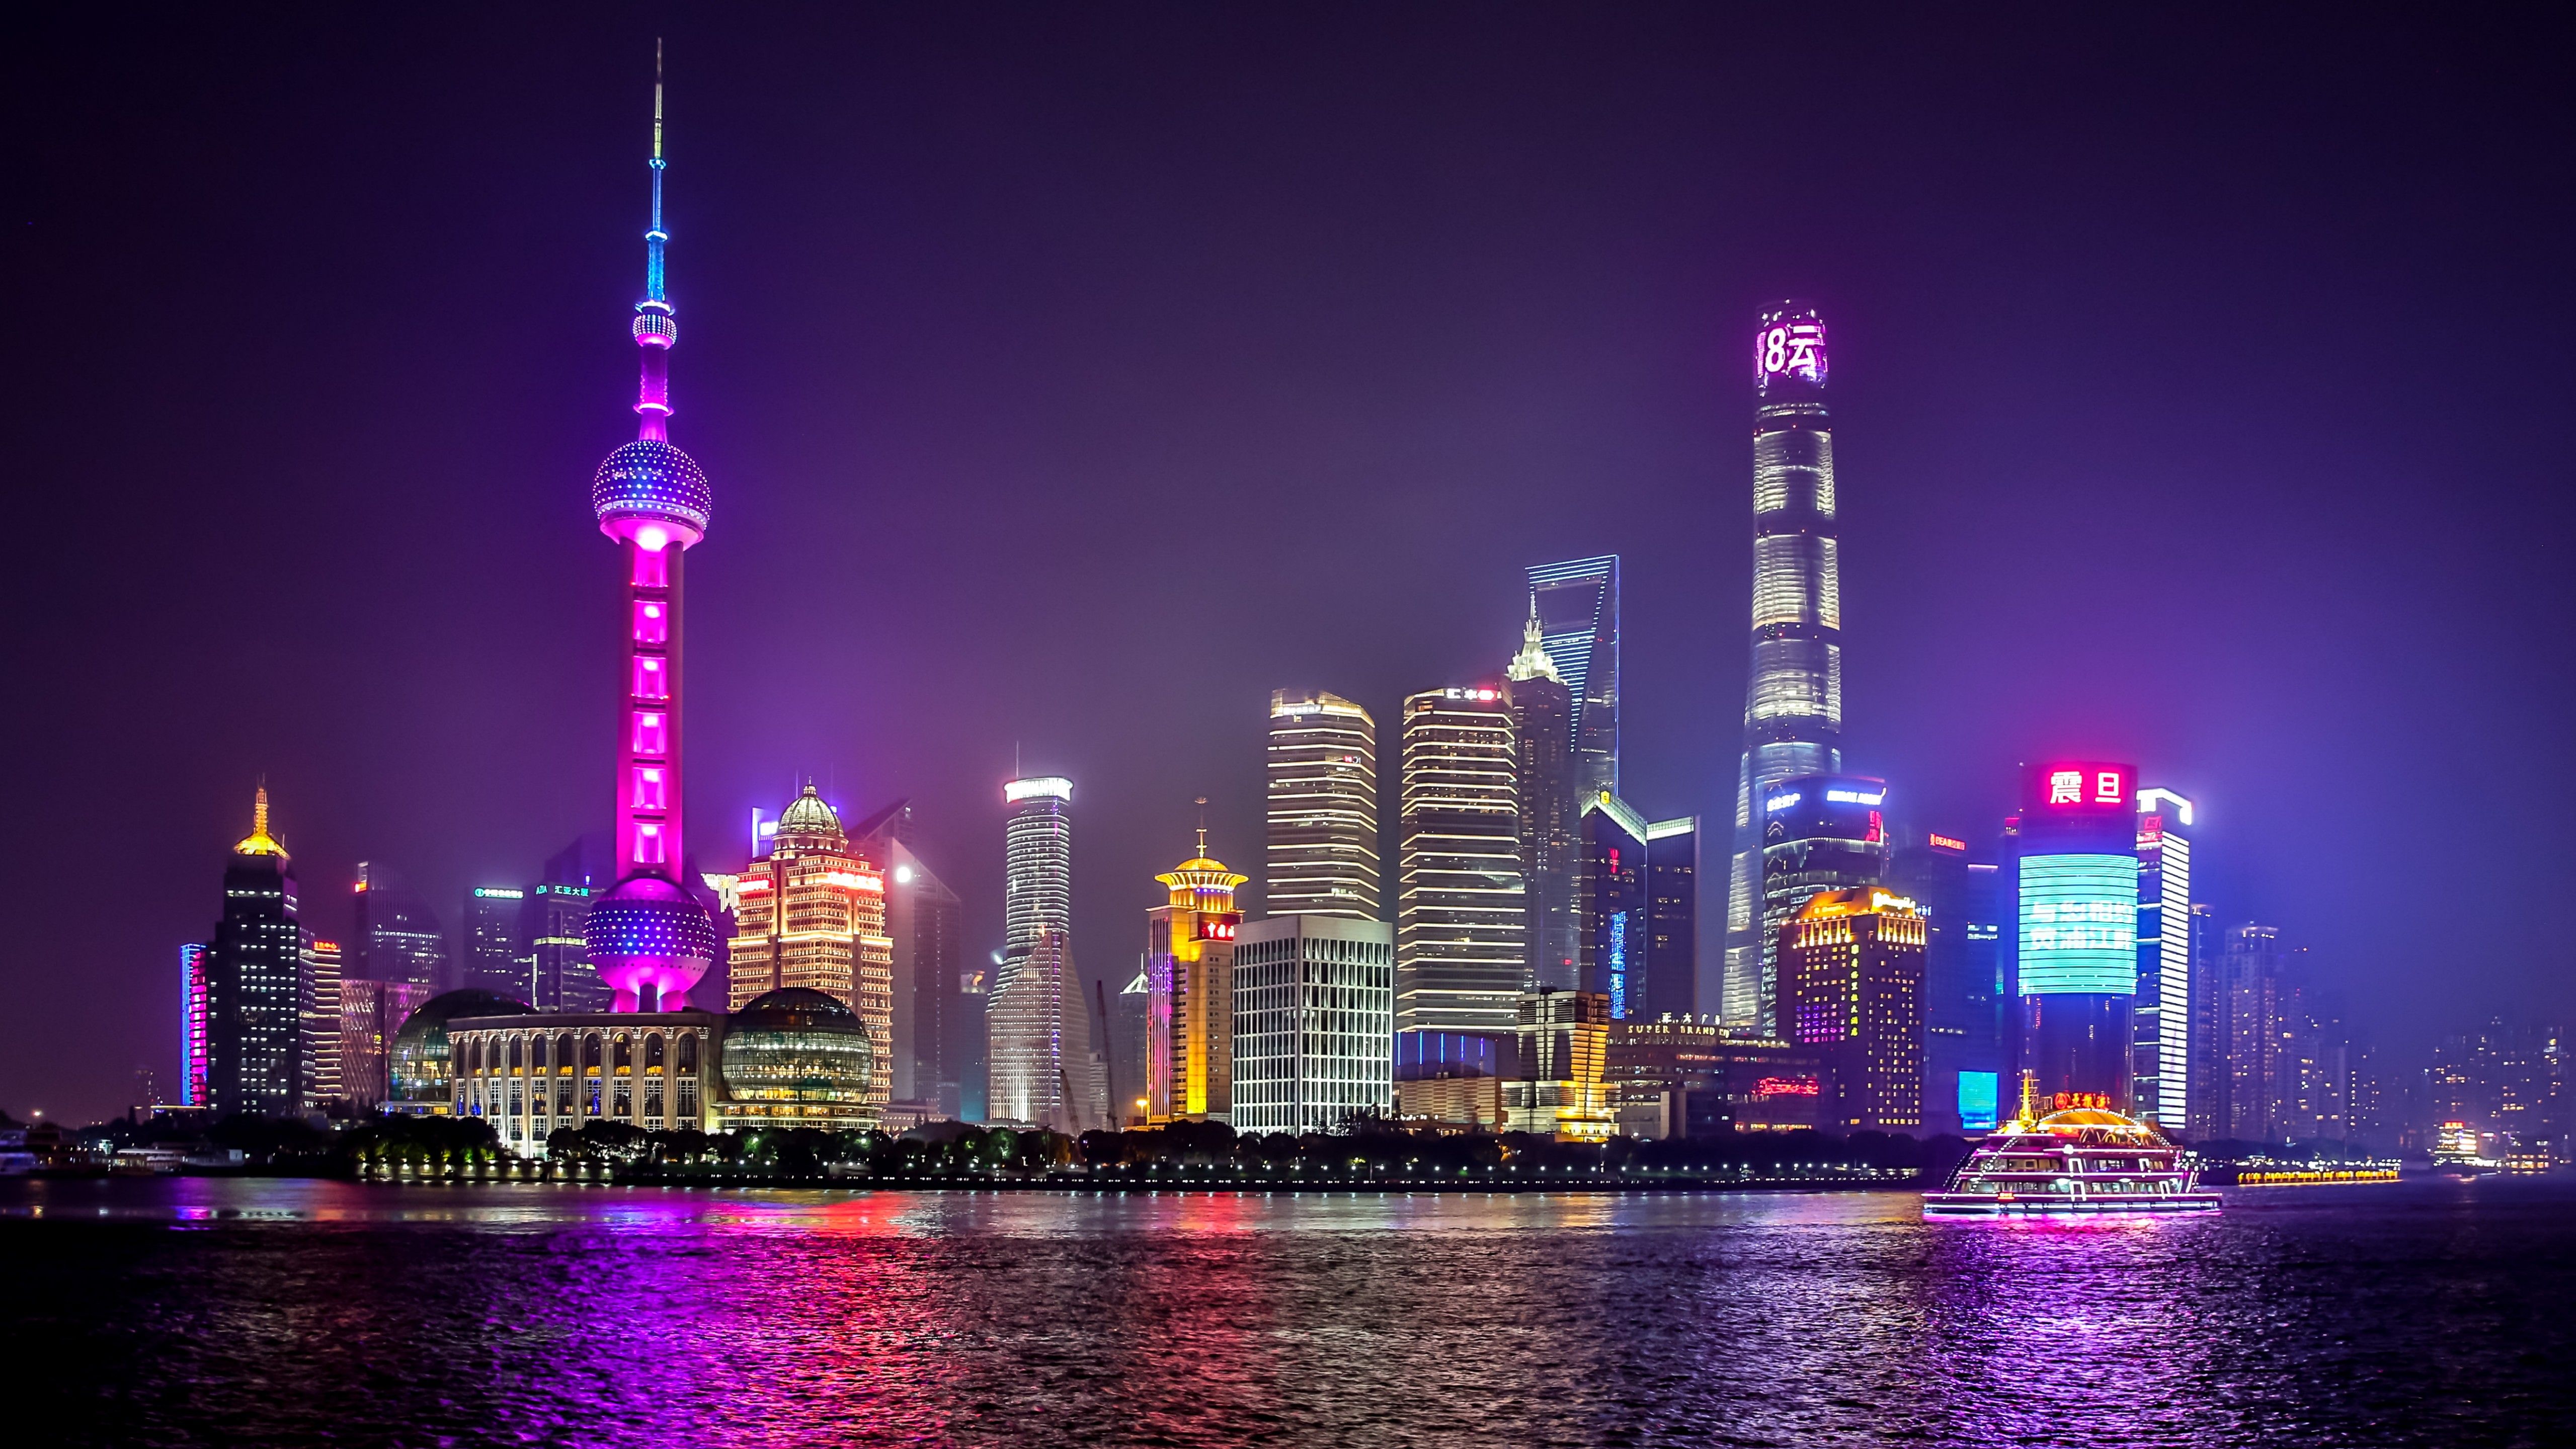 Shanghai City 4K Wallpaper, Body of Water, Reflection, Skyscrapers, Night life, Cityscape, Lights, World